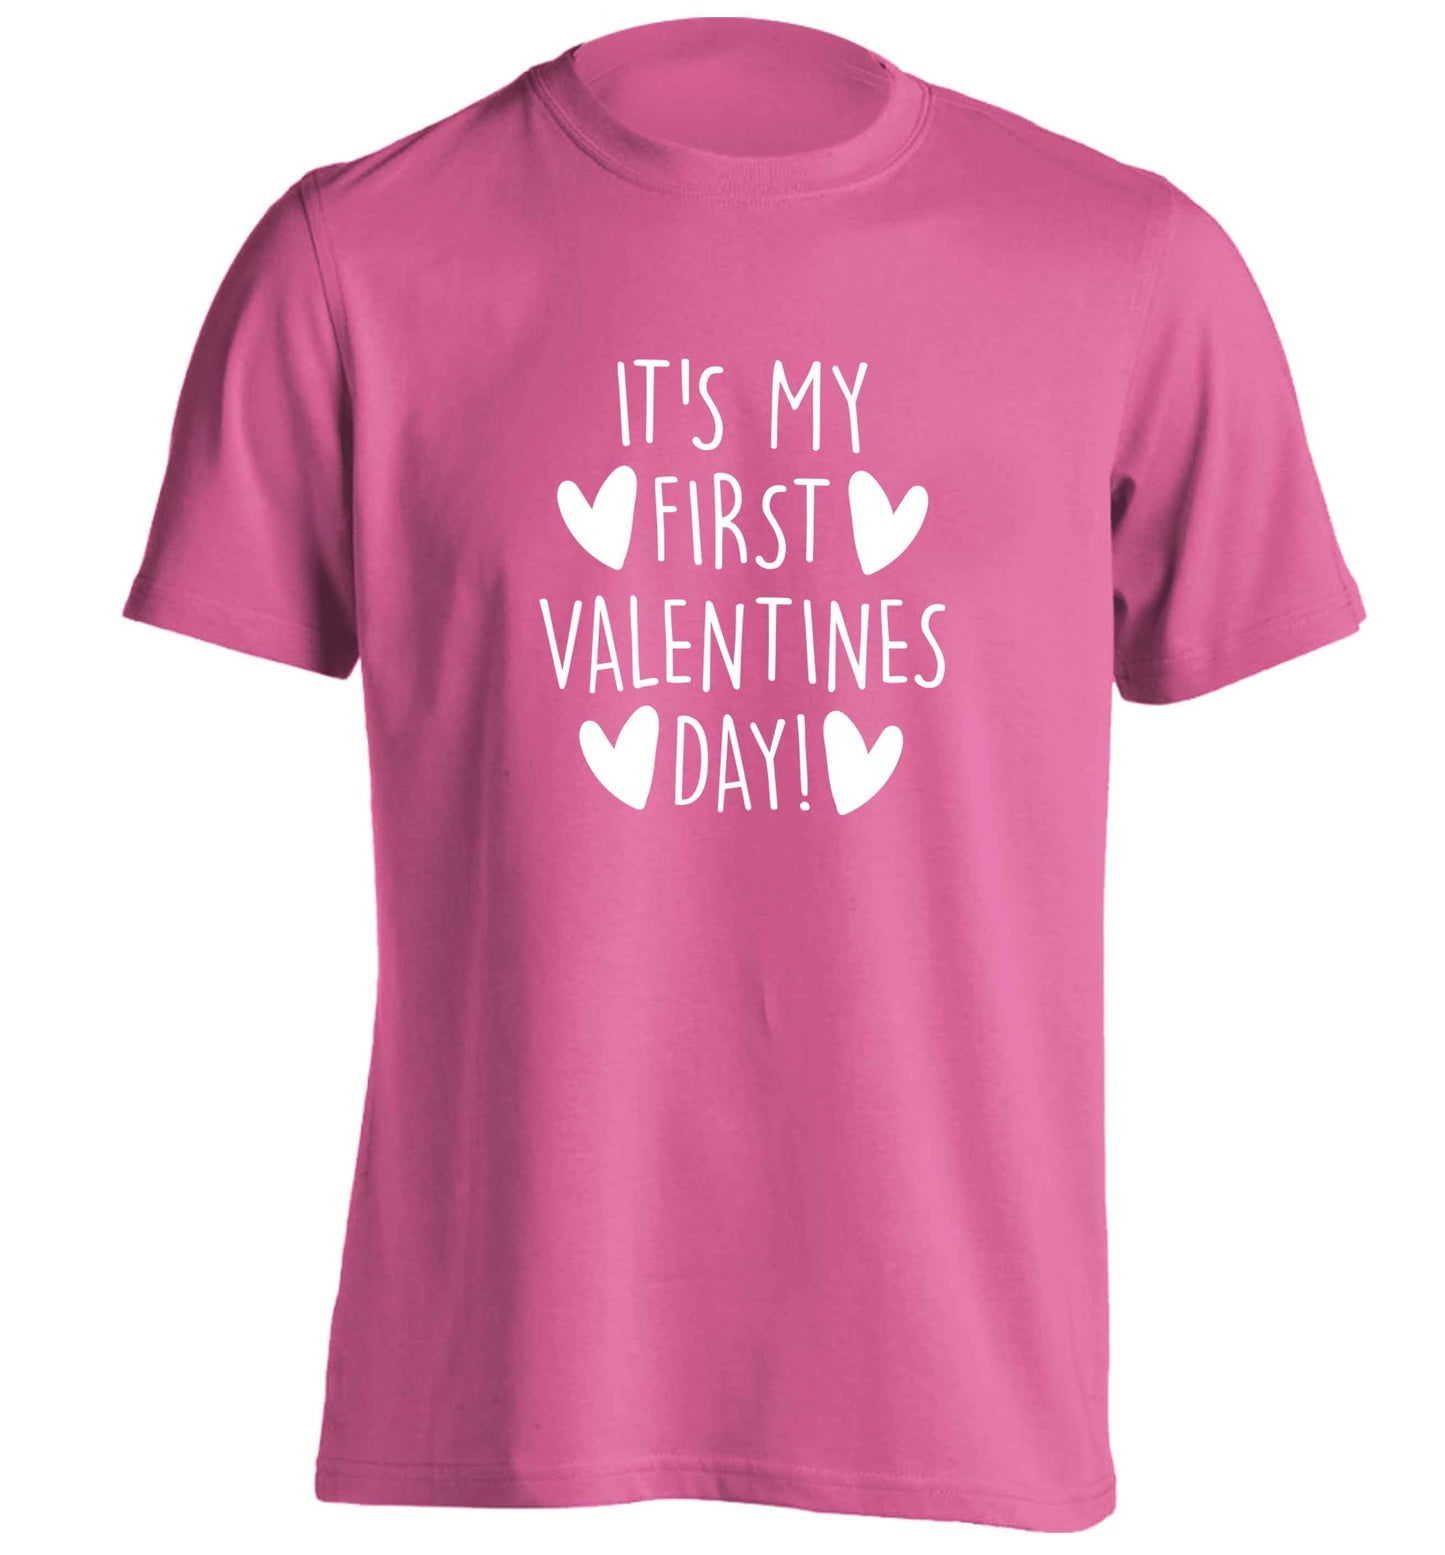 It's my first valentines day! adults unisex pink Tshirt 2XL